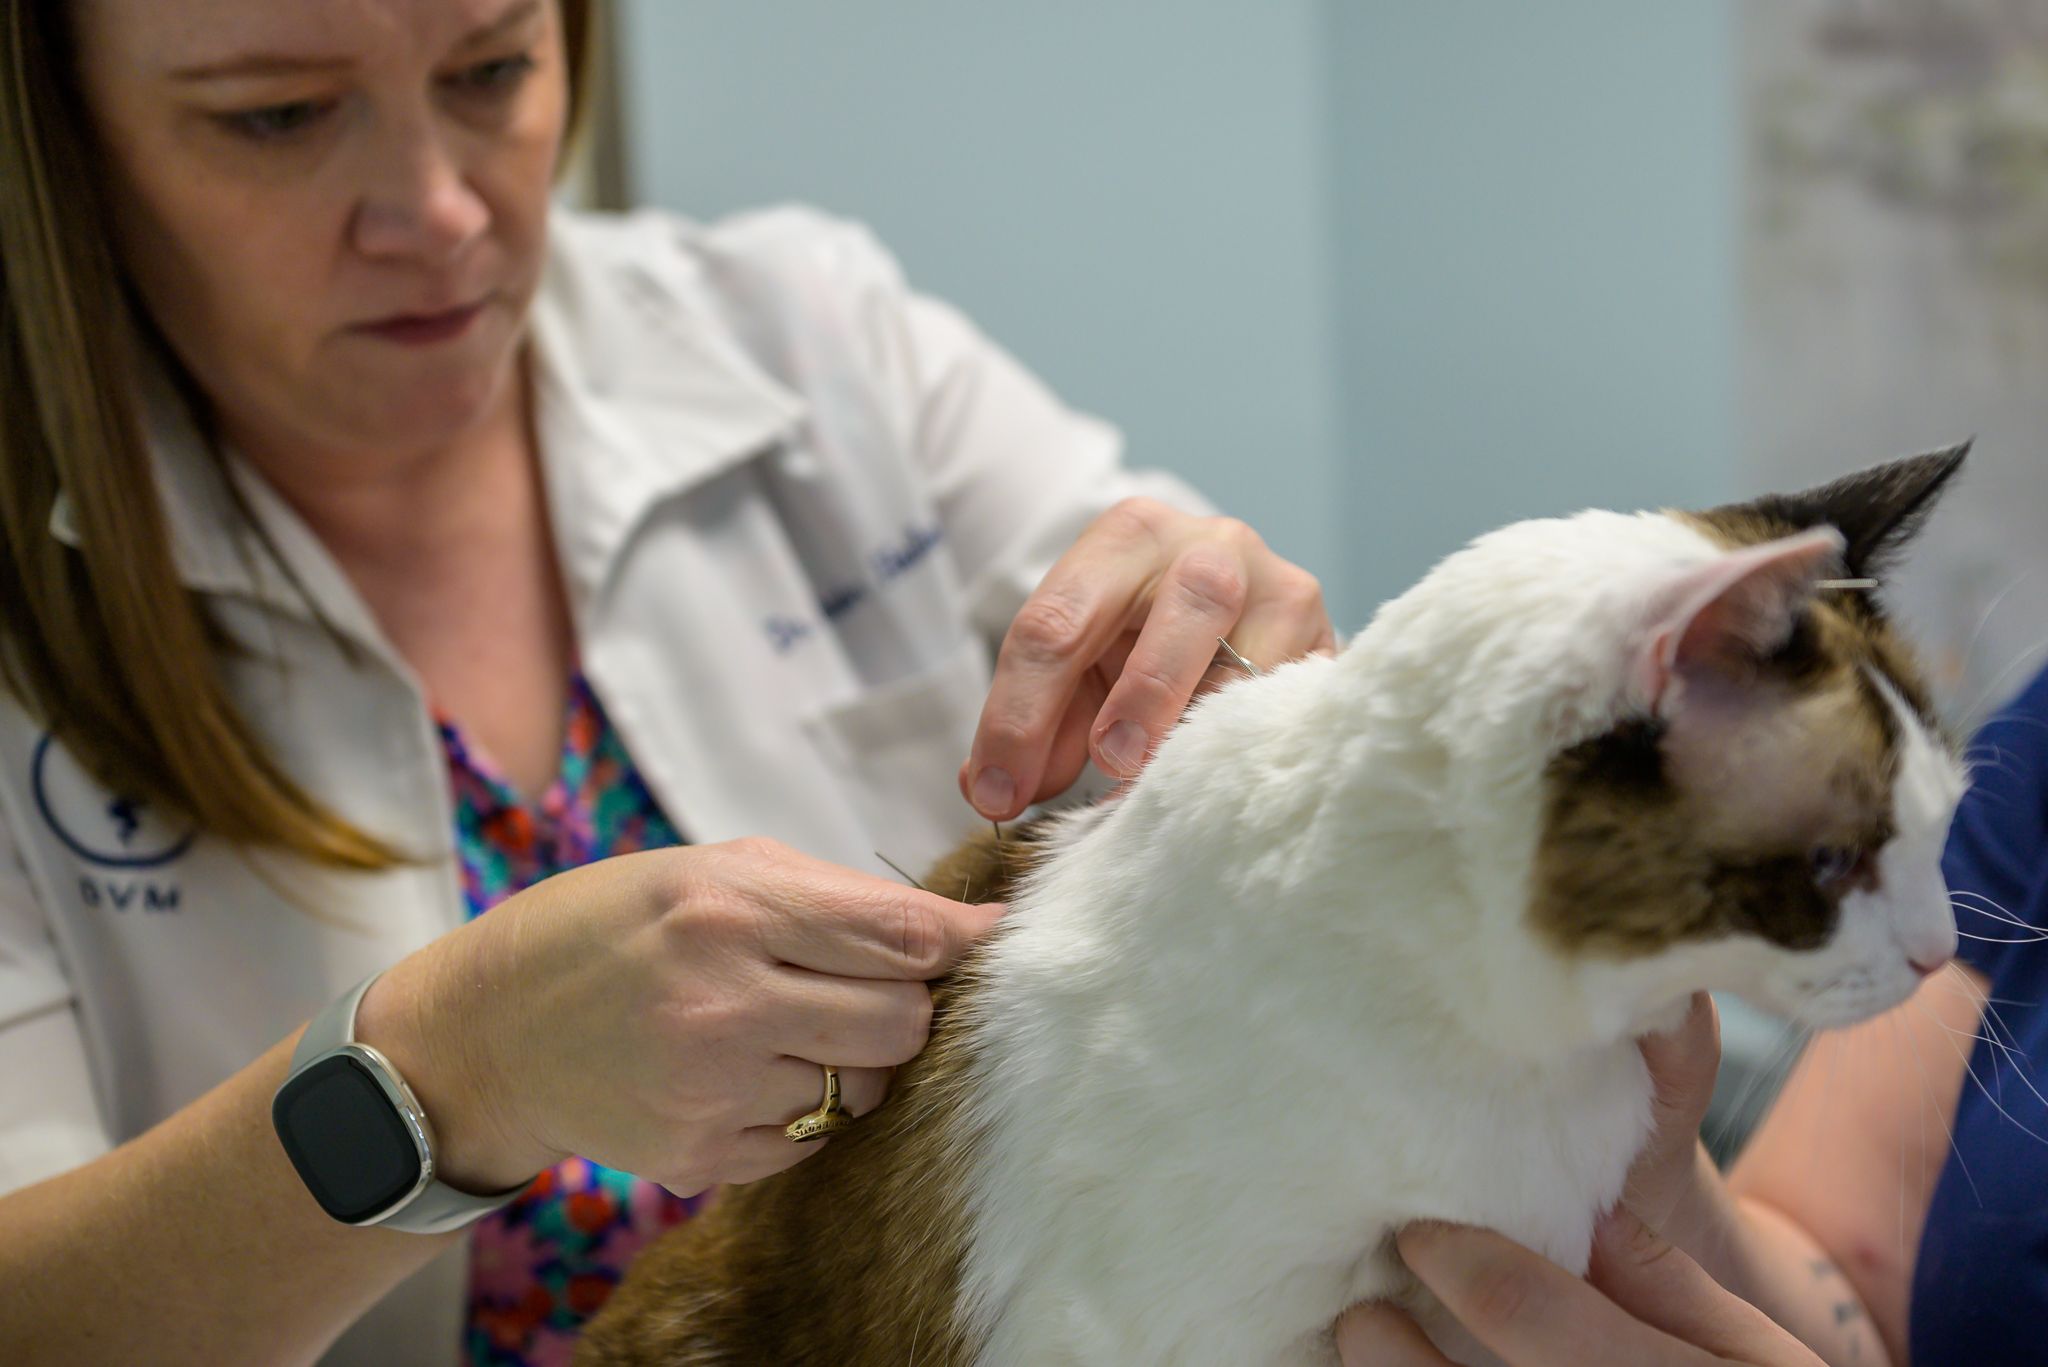 A veterinarian examining a calico cat in a clinic, with a focus on the cat's back, while being assisted by another person. The vet is wearing a white coat.